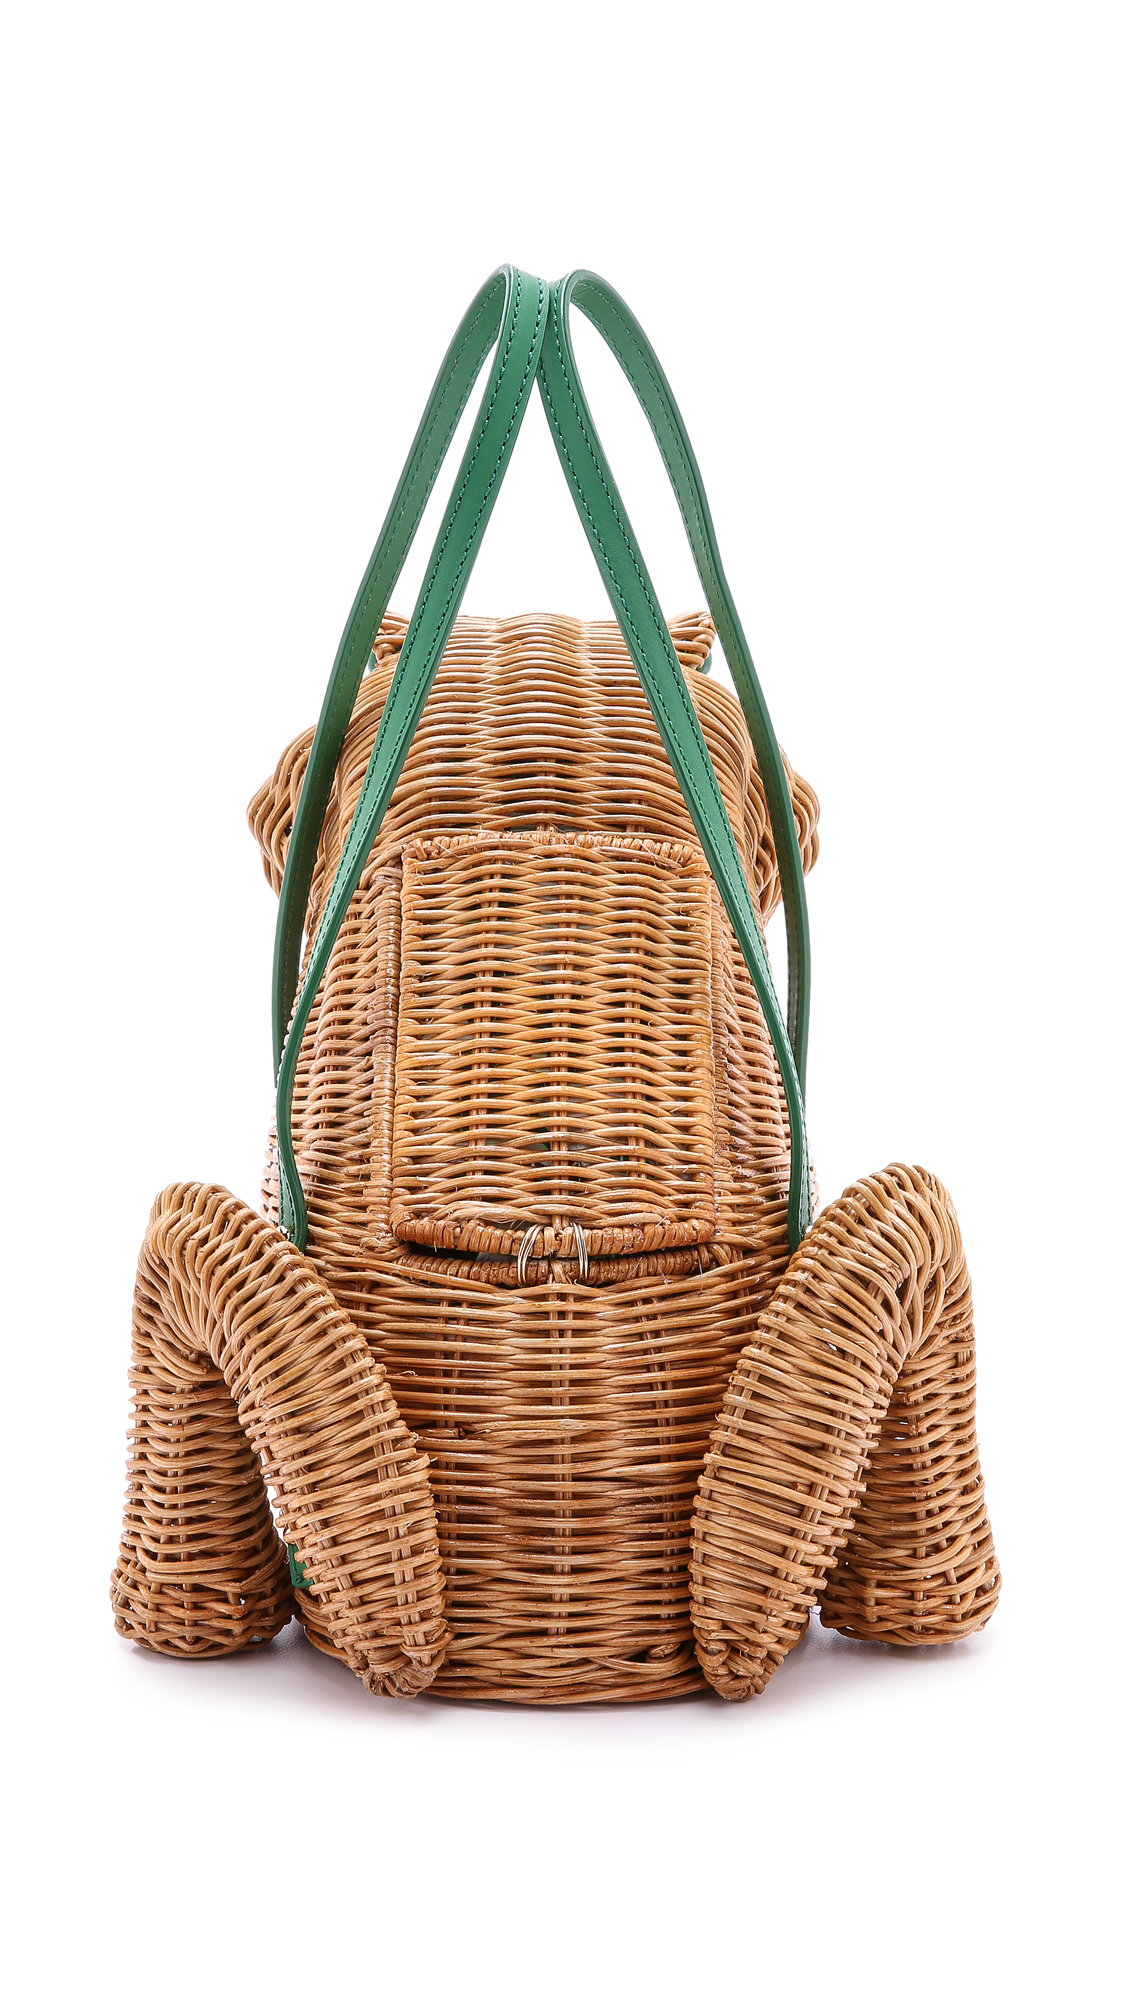 Kate Spade Spring Forward Wicker Frog Bag - Natural/Sprout Green | Lyst